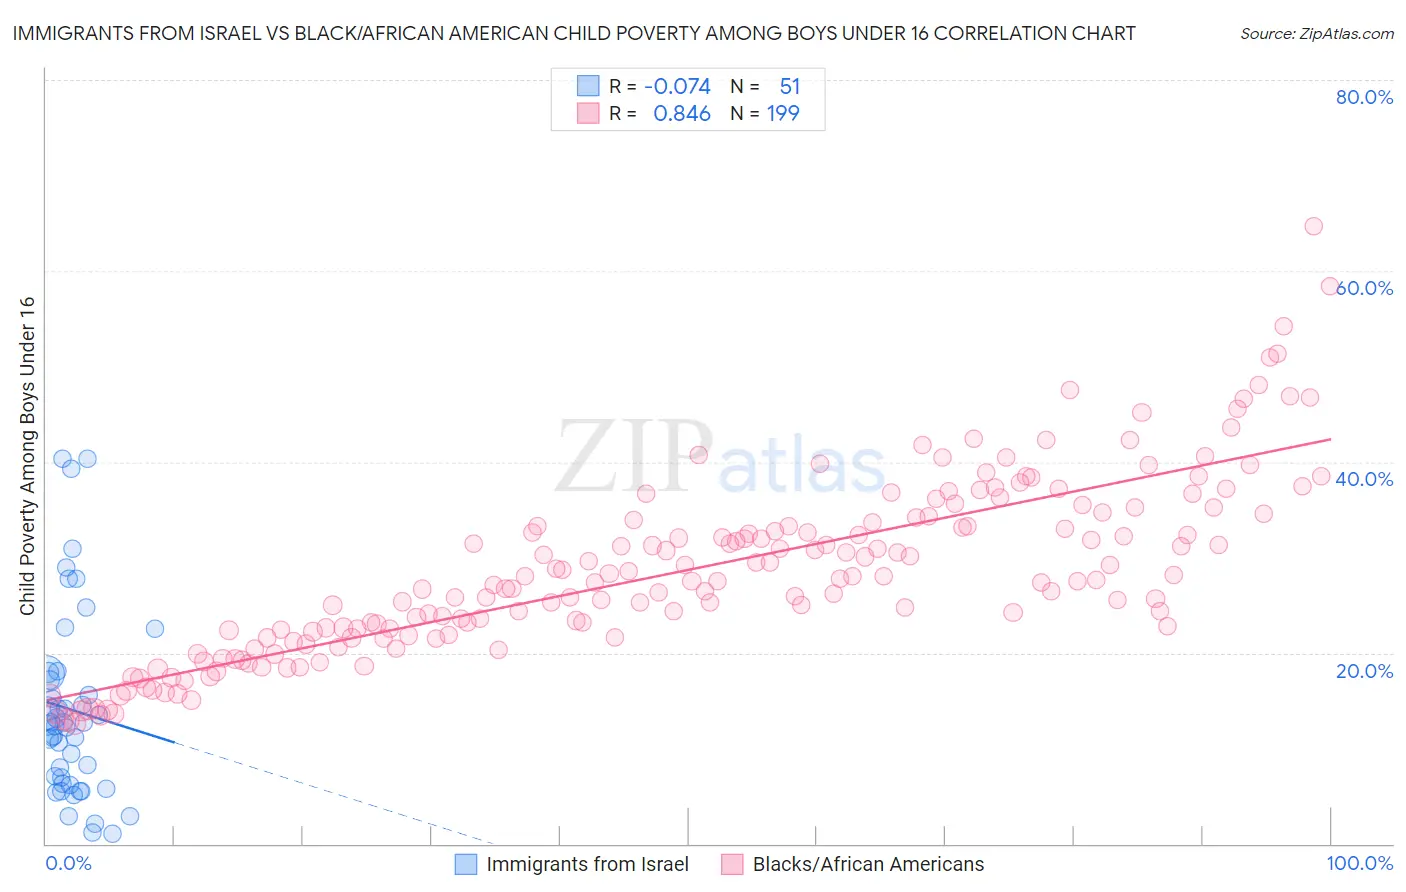 Immigrants from Israel vs Black/African American Child Poverty Among Boys Under 16